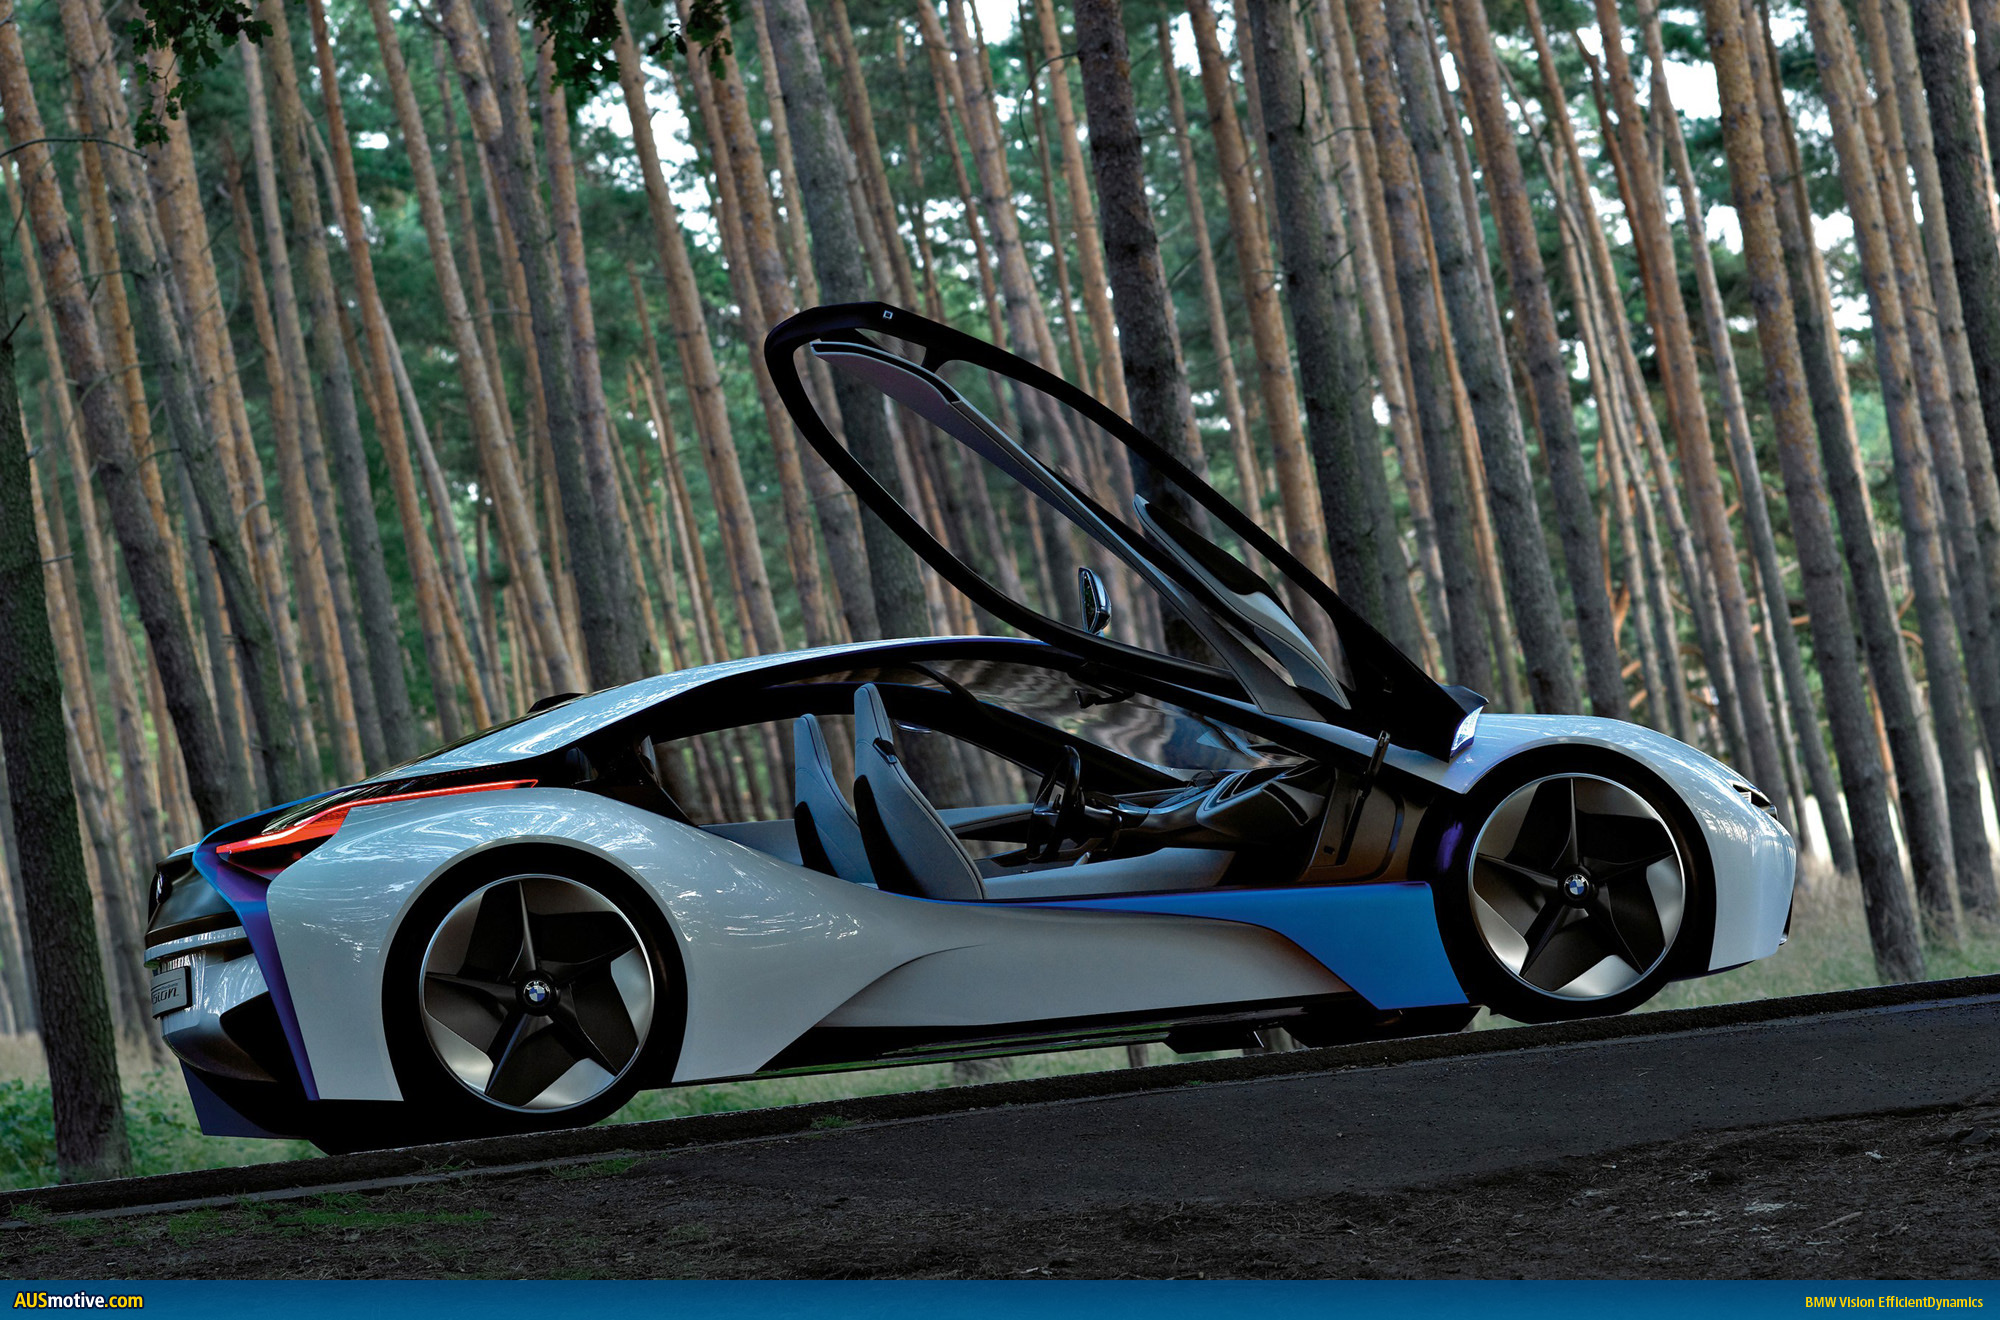 How much is the bmw vision efficientdynamics #1